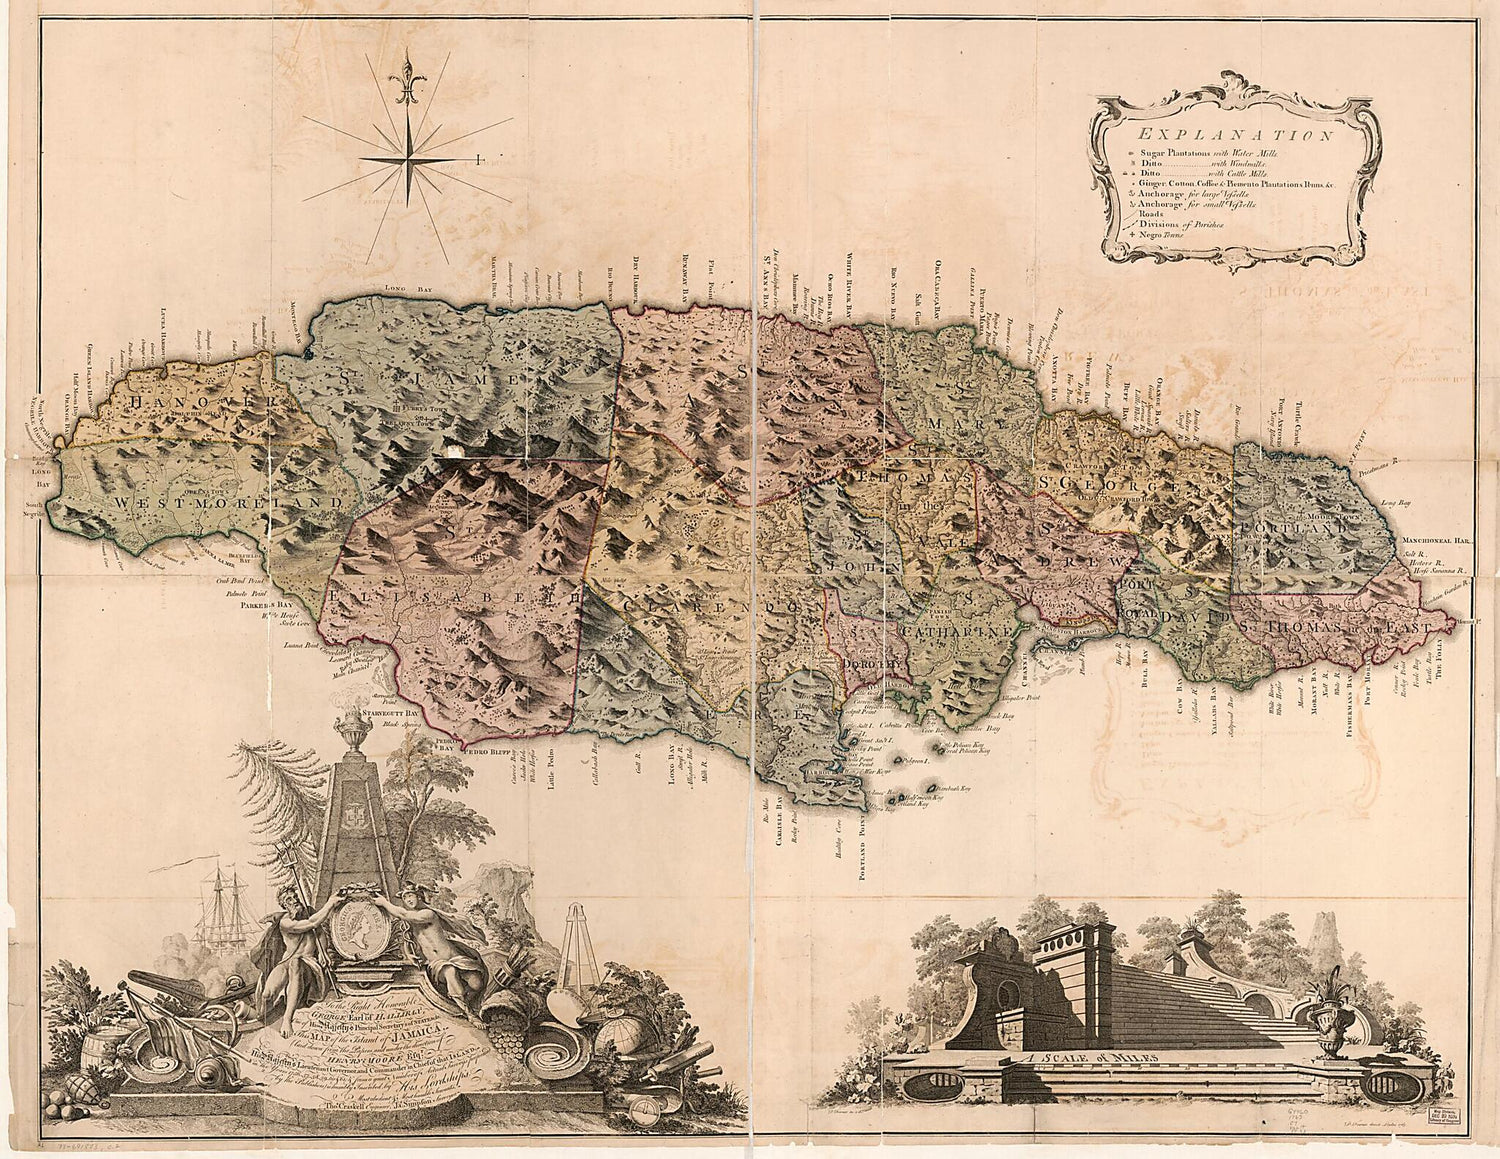 This old map of This Map of the Island of Jamaica; from 1763 was created by Thomas Craskell, Daniel Fournier, Henry Moore, James Simpson in 1763